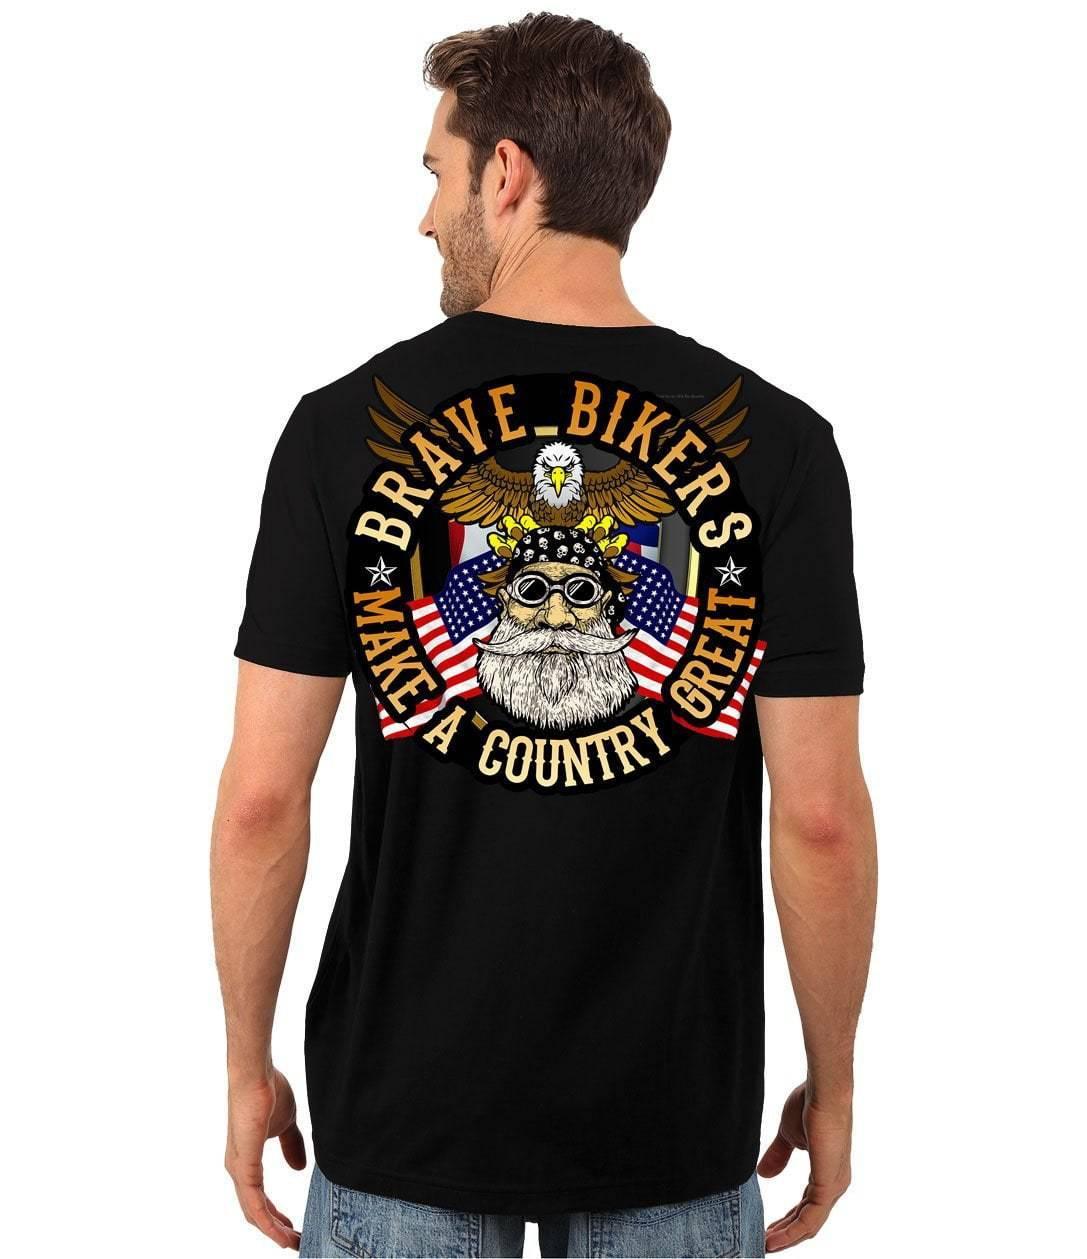 Bikers Make A Country Great T-Shirt - American Legend Rider